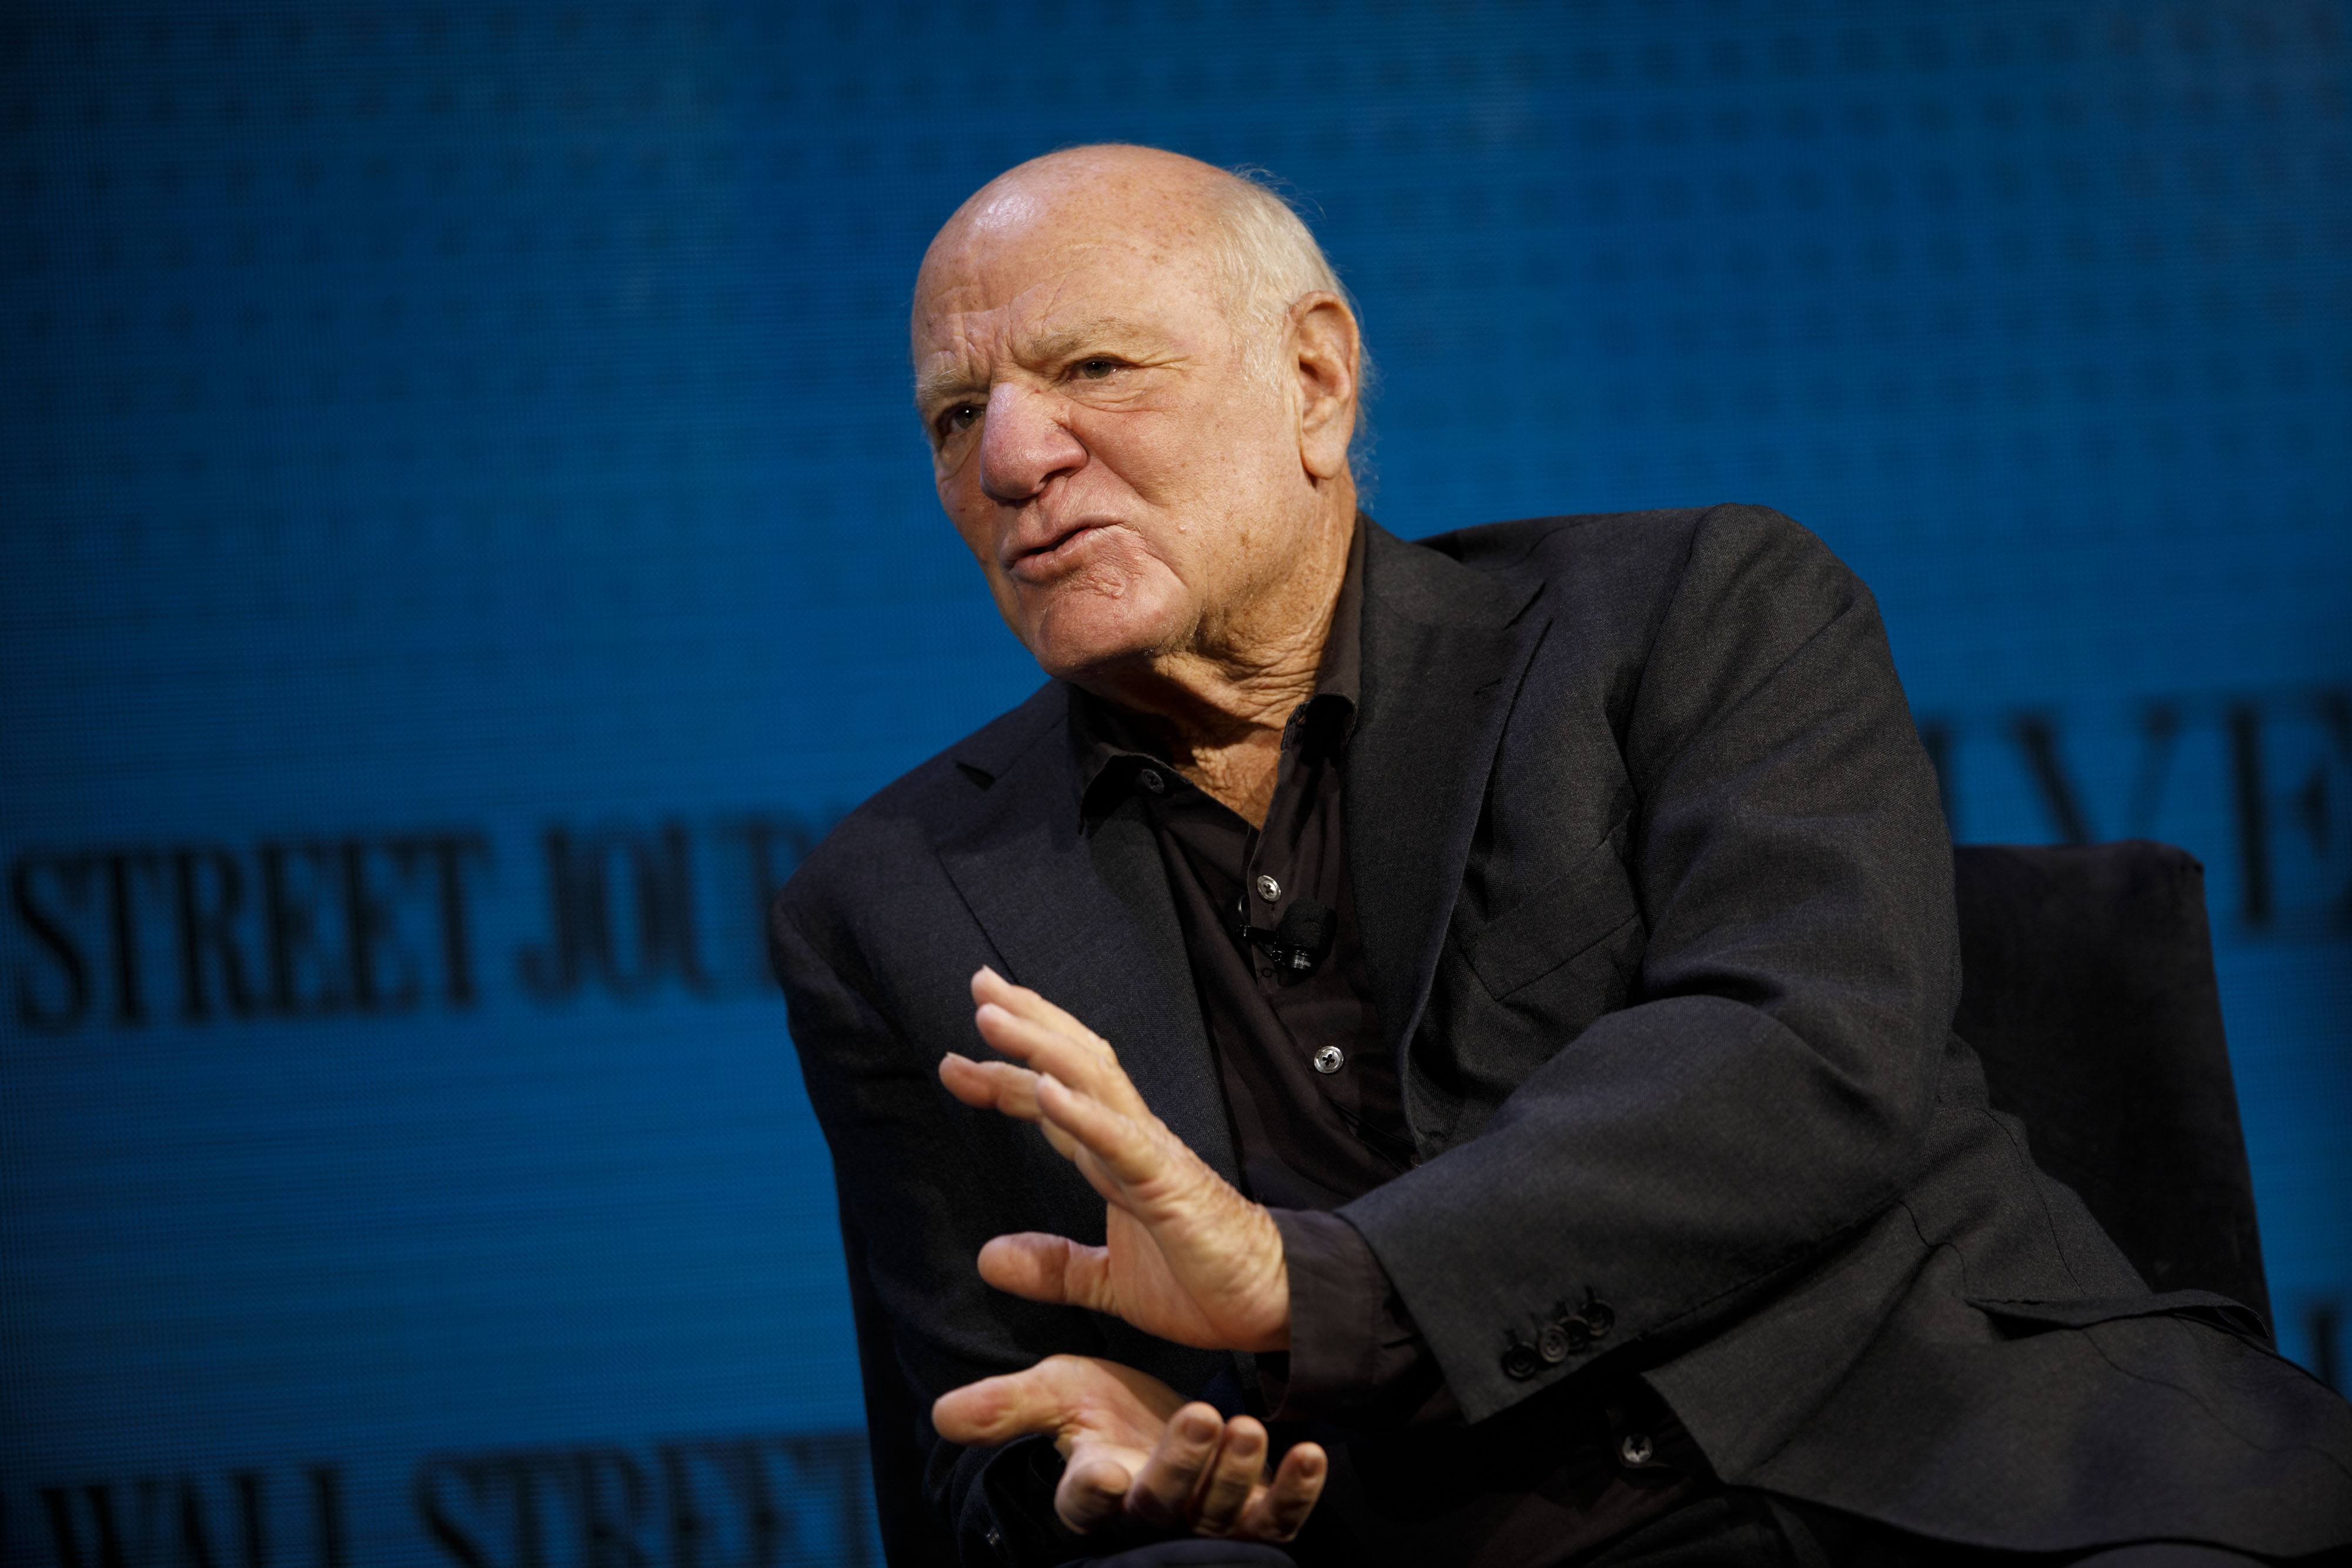 Barry Diller takes shots at VCs, startup valuations